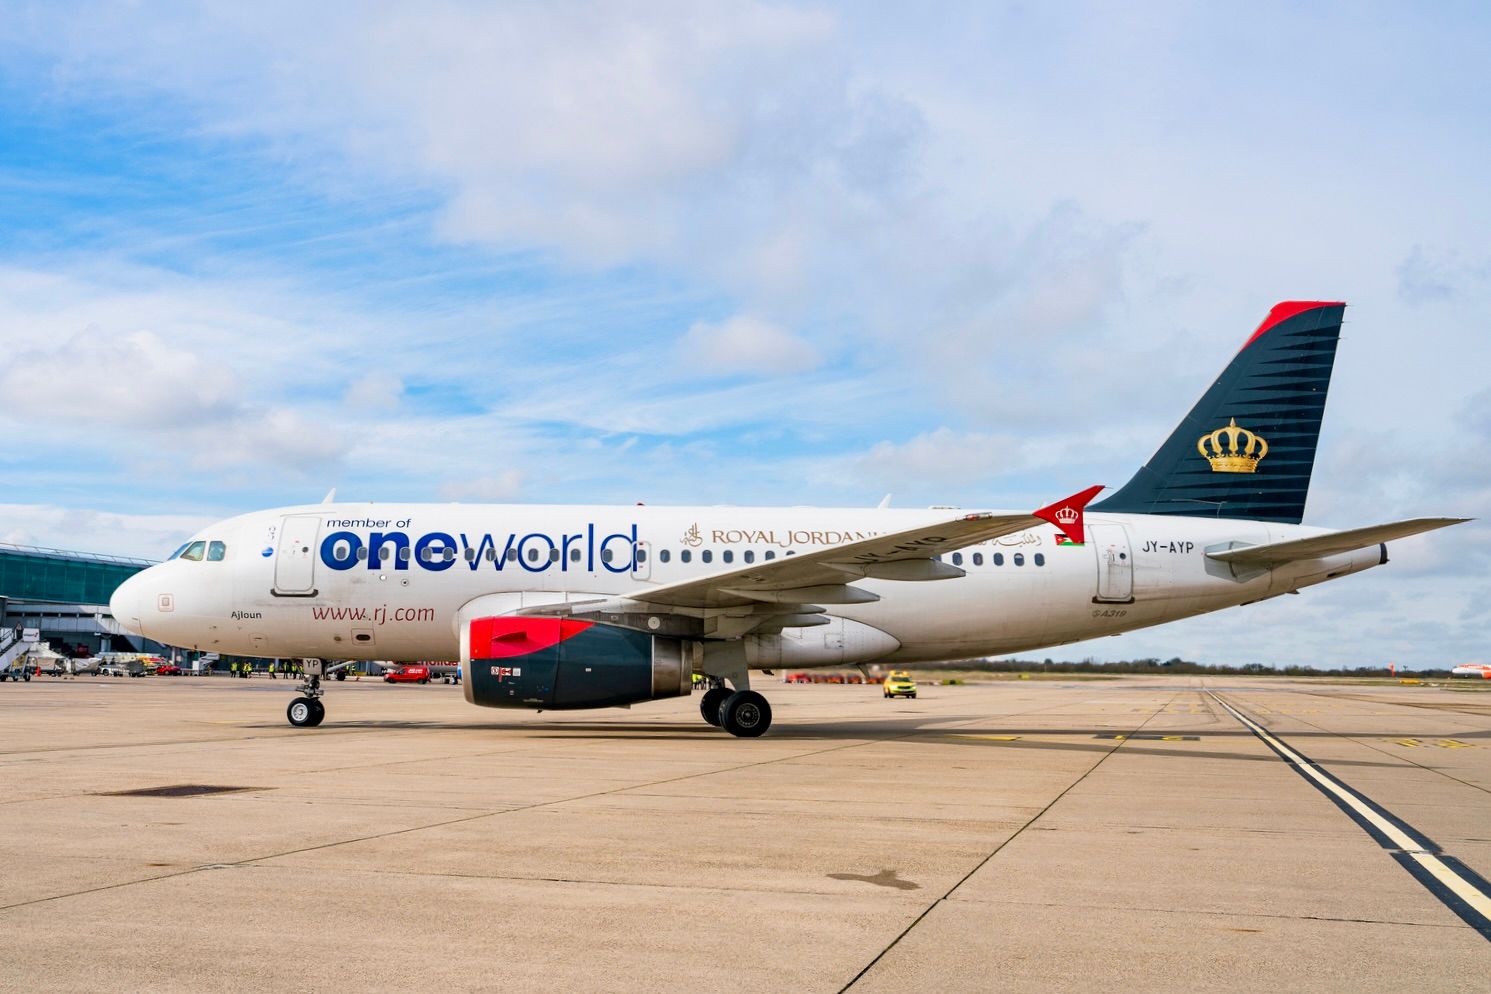 A Royal Jordanian Airbus A319 (JY-AYP) in oneworld livery